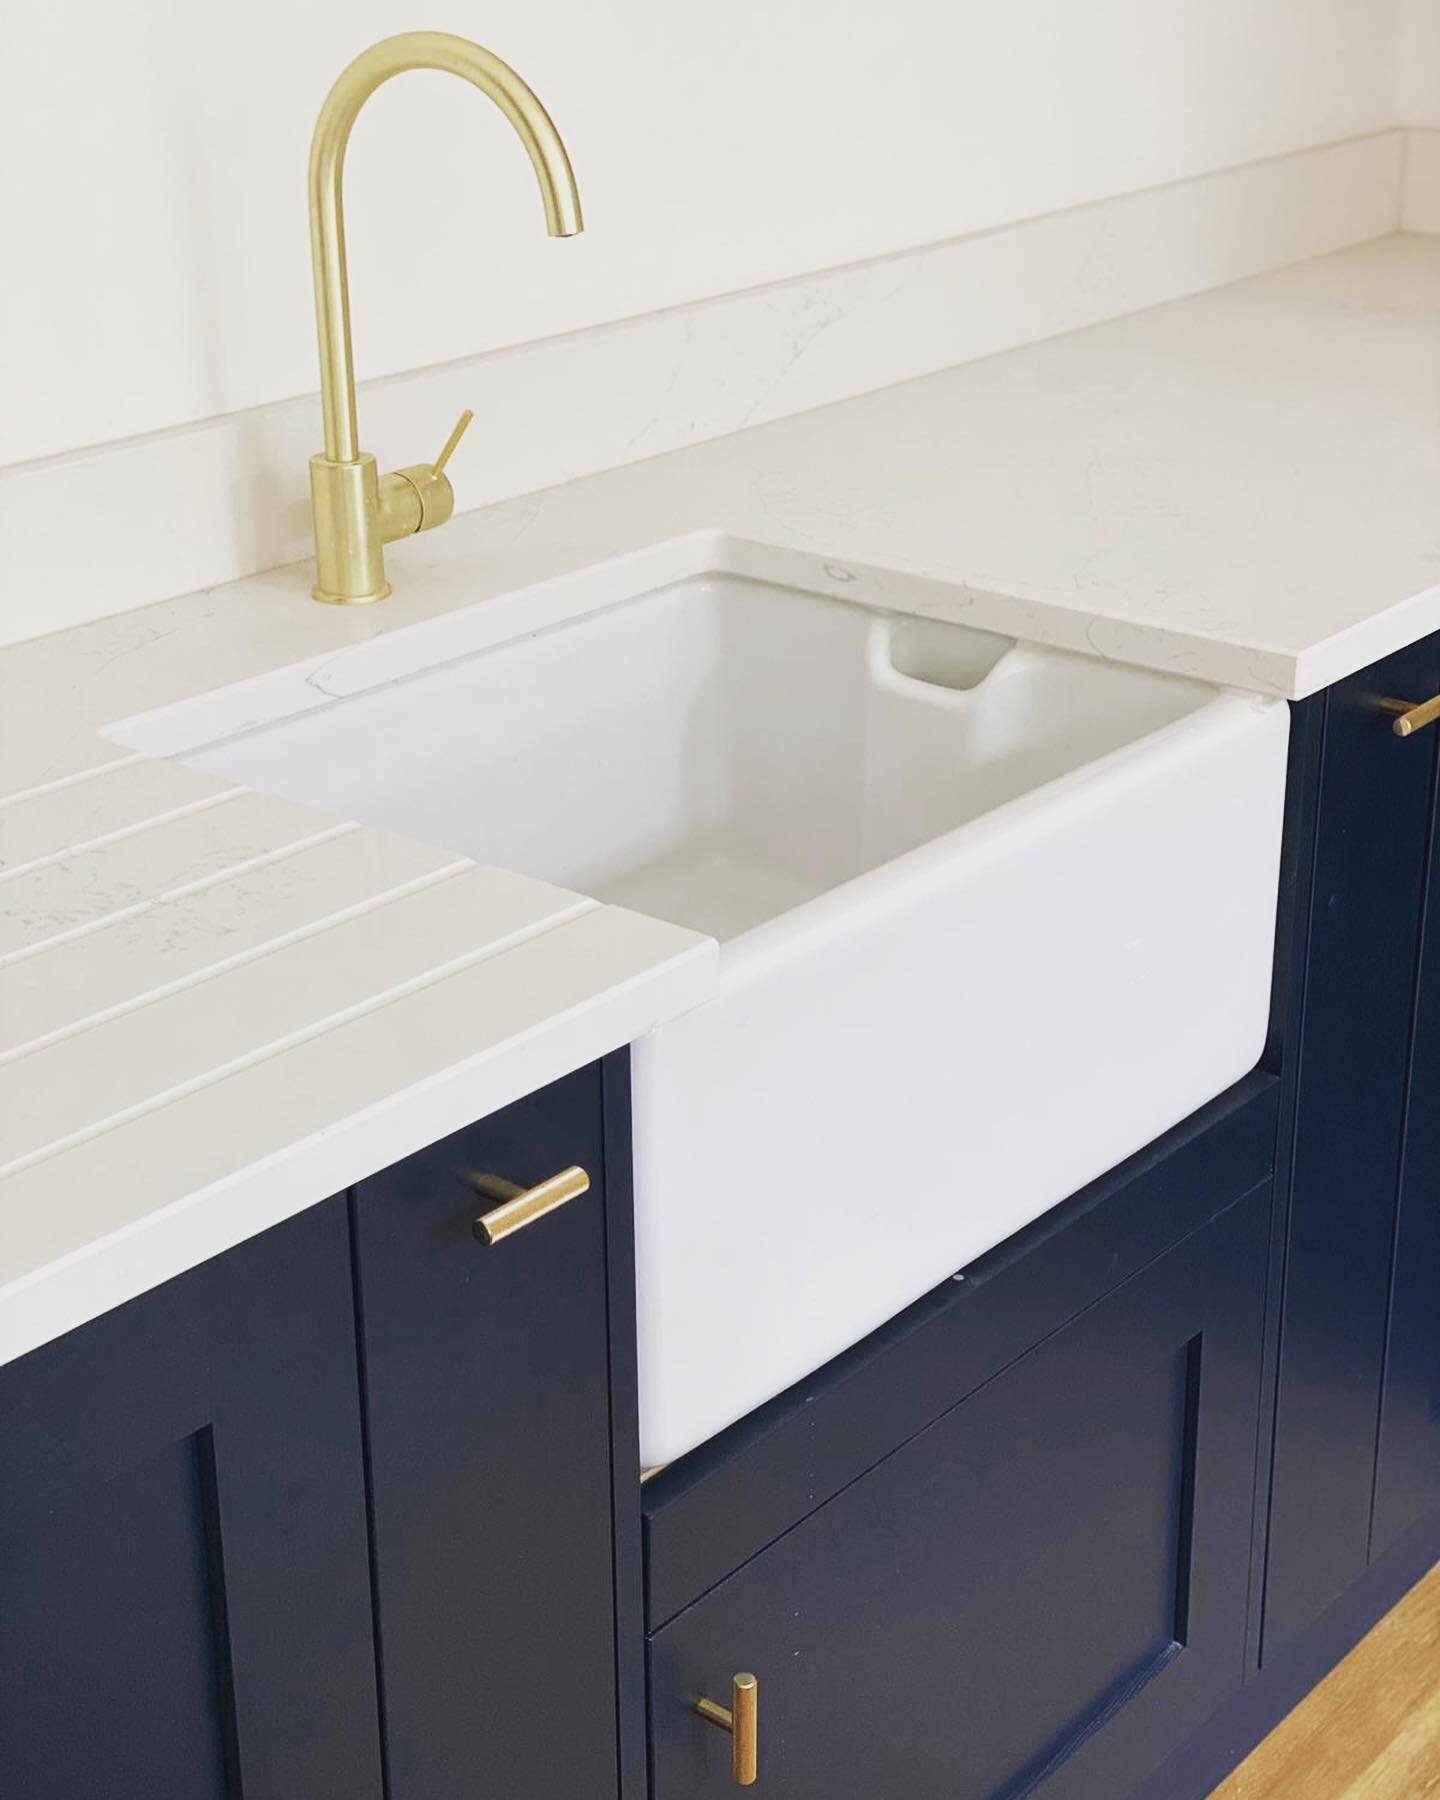 Navy has been one of this year&rsquo;s most requested kitchen finishes. This kitchen was the cherry on top of this Altrincham renovation, the marrying of the dark units with brass accessories makes for a striking finish. 

Clients with great taste 👌